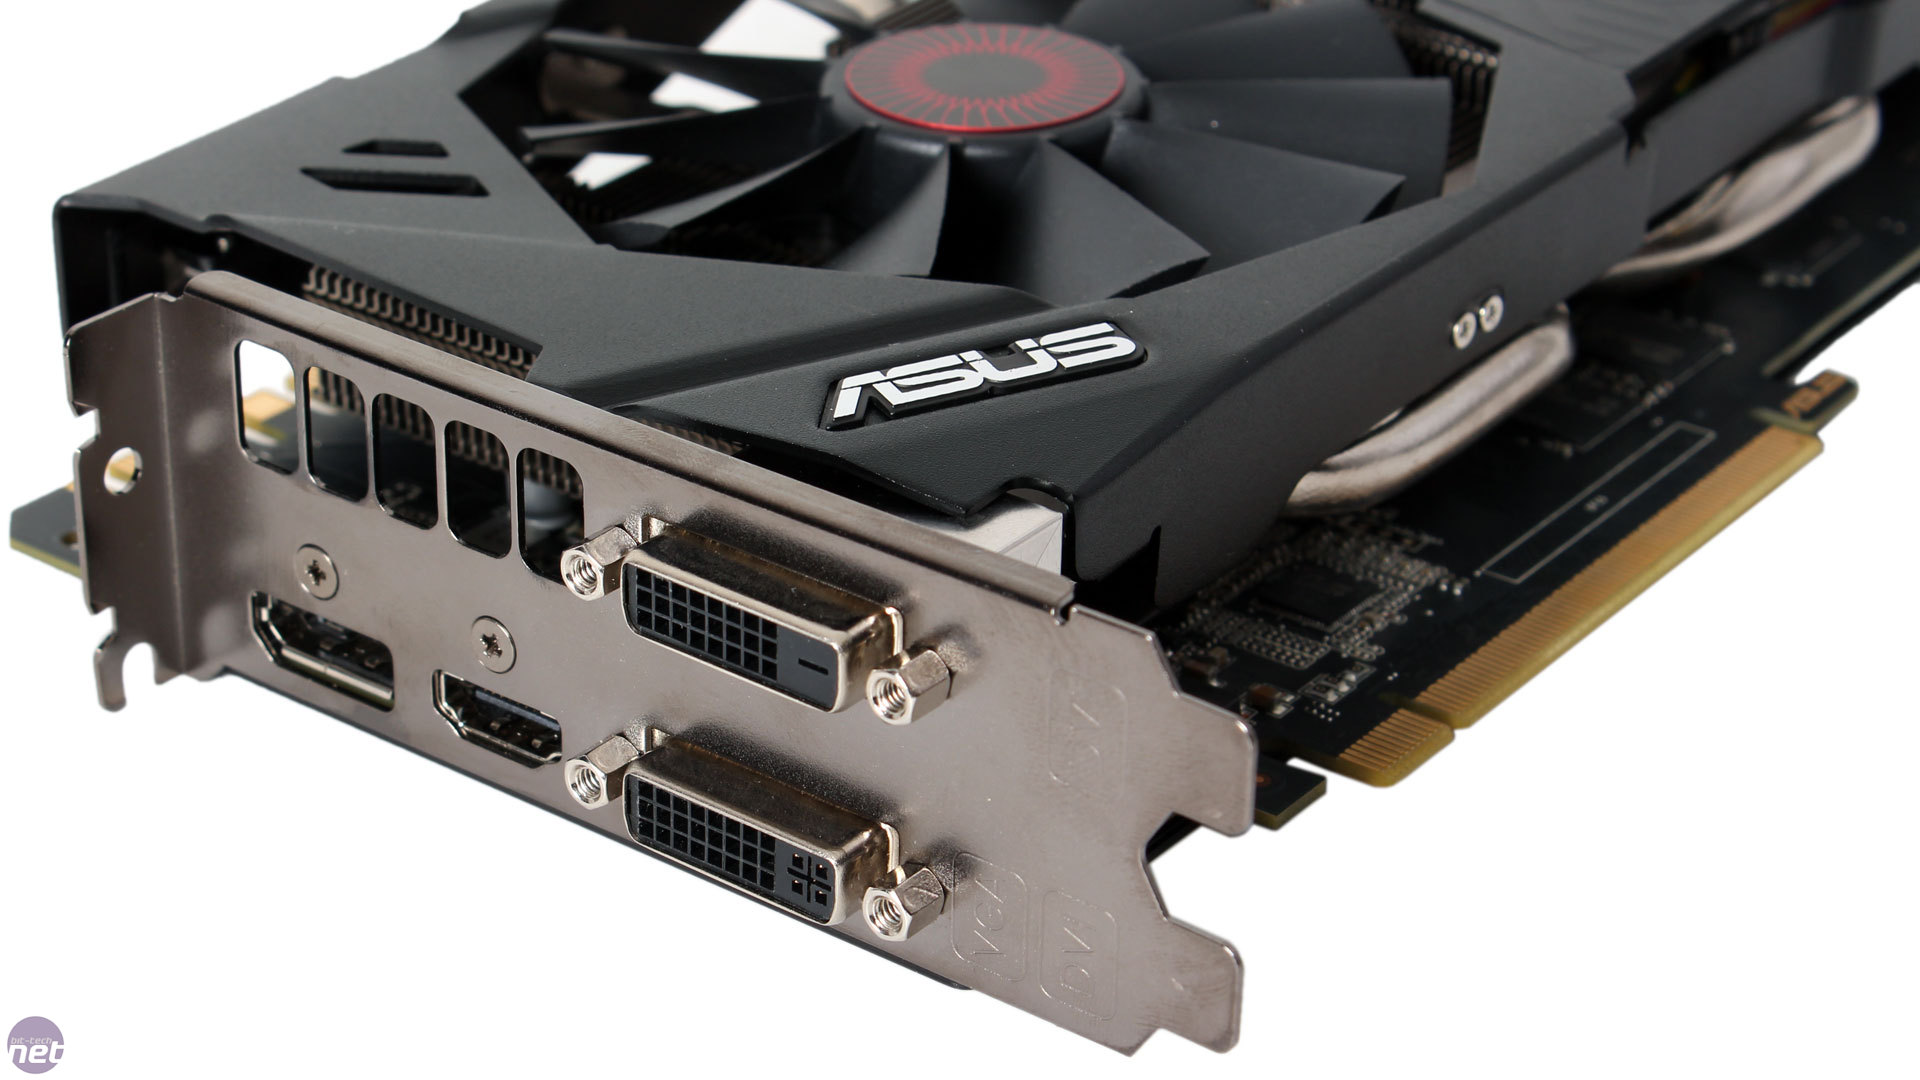 Arving Isaac uvidenhed Nvidia GeForce GTX 970 Review Roundup: feat. ASUS, EVGA and MSI |  bit-tech.net